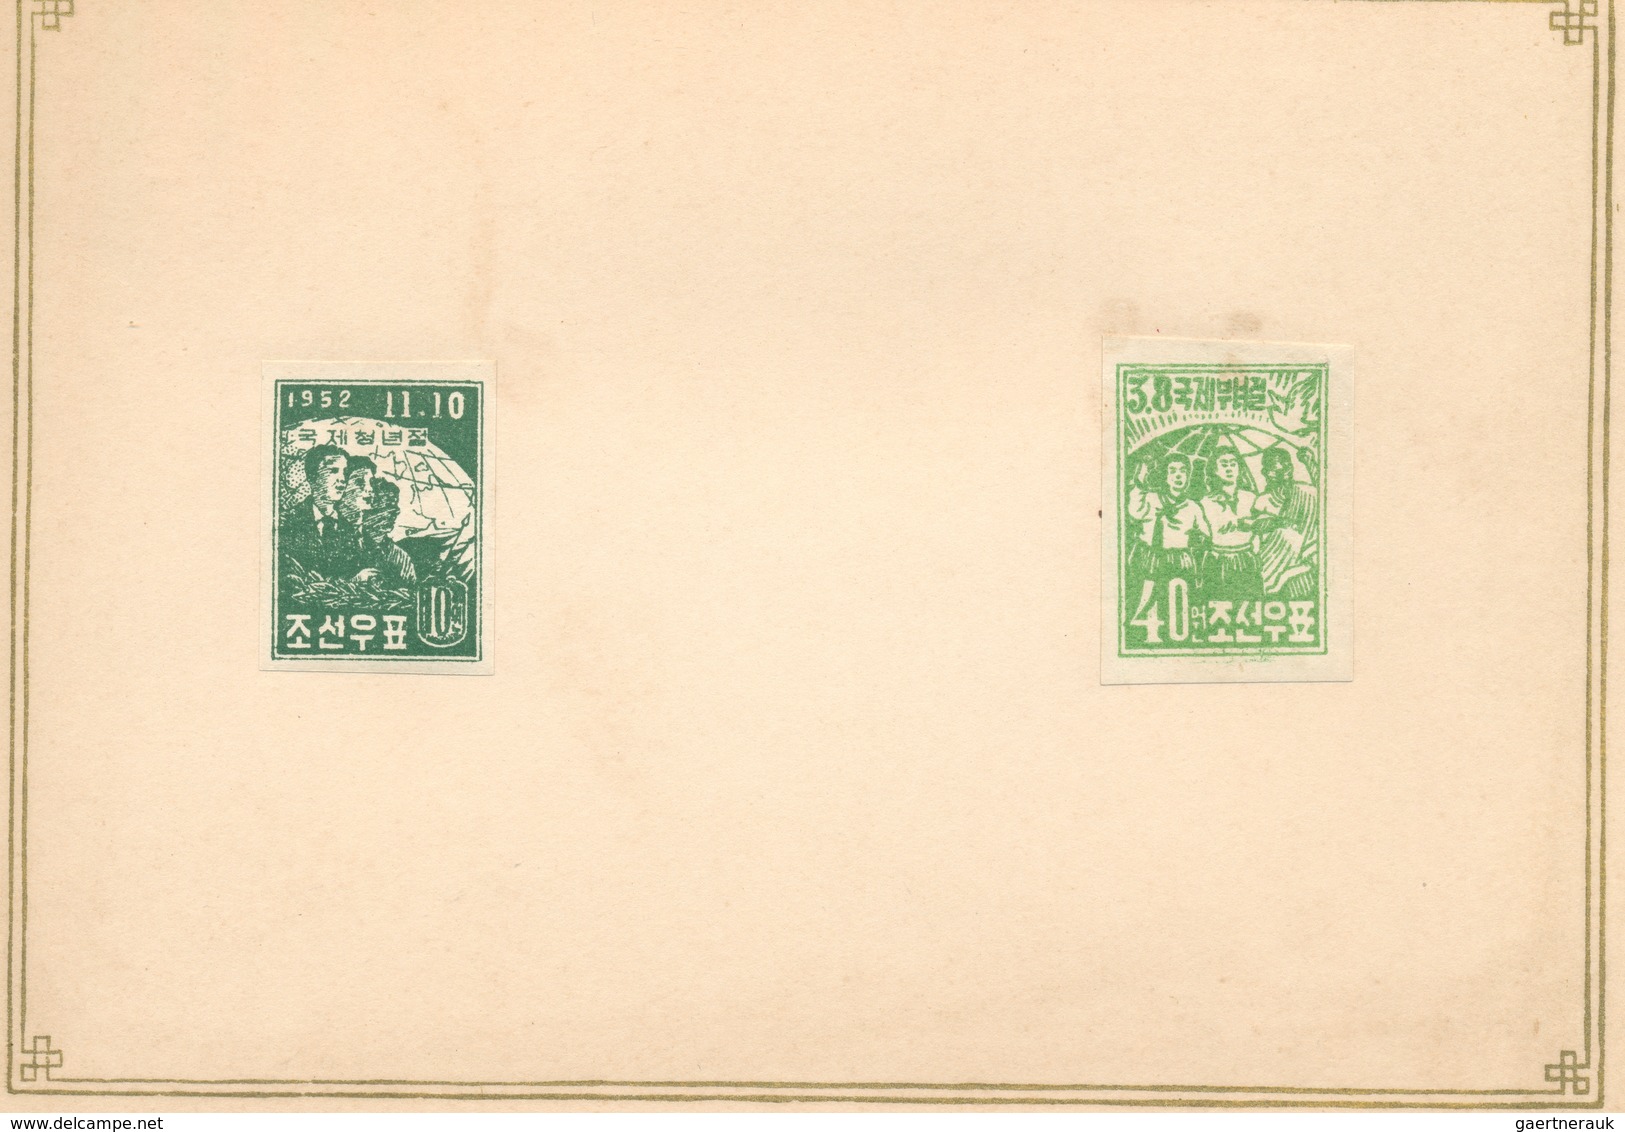 Korea-Nord: 1948/55, three presentation books with 1st printings only, issued without gum: golden ti